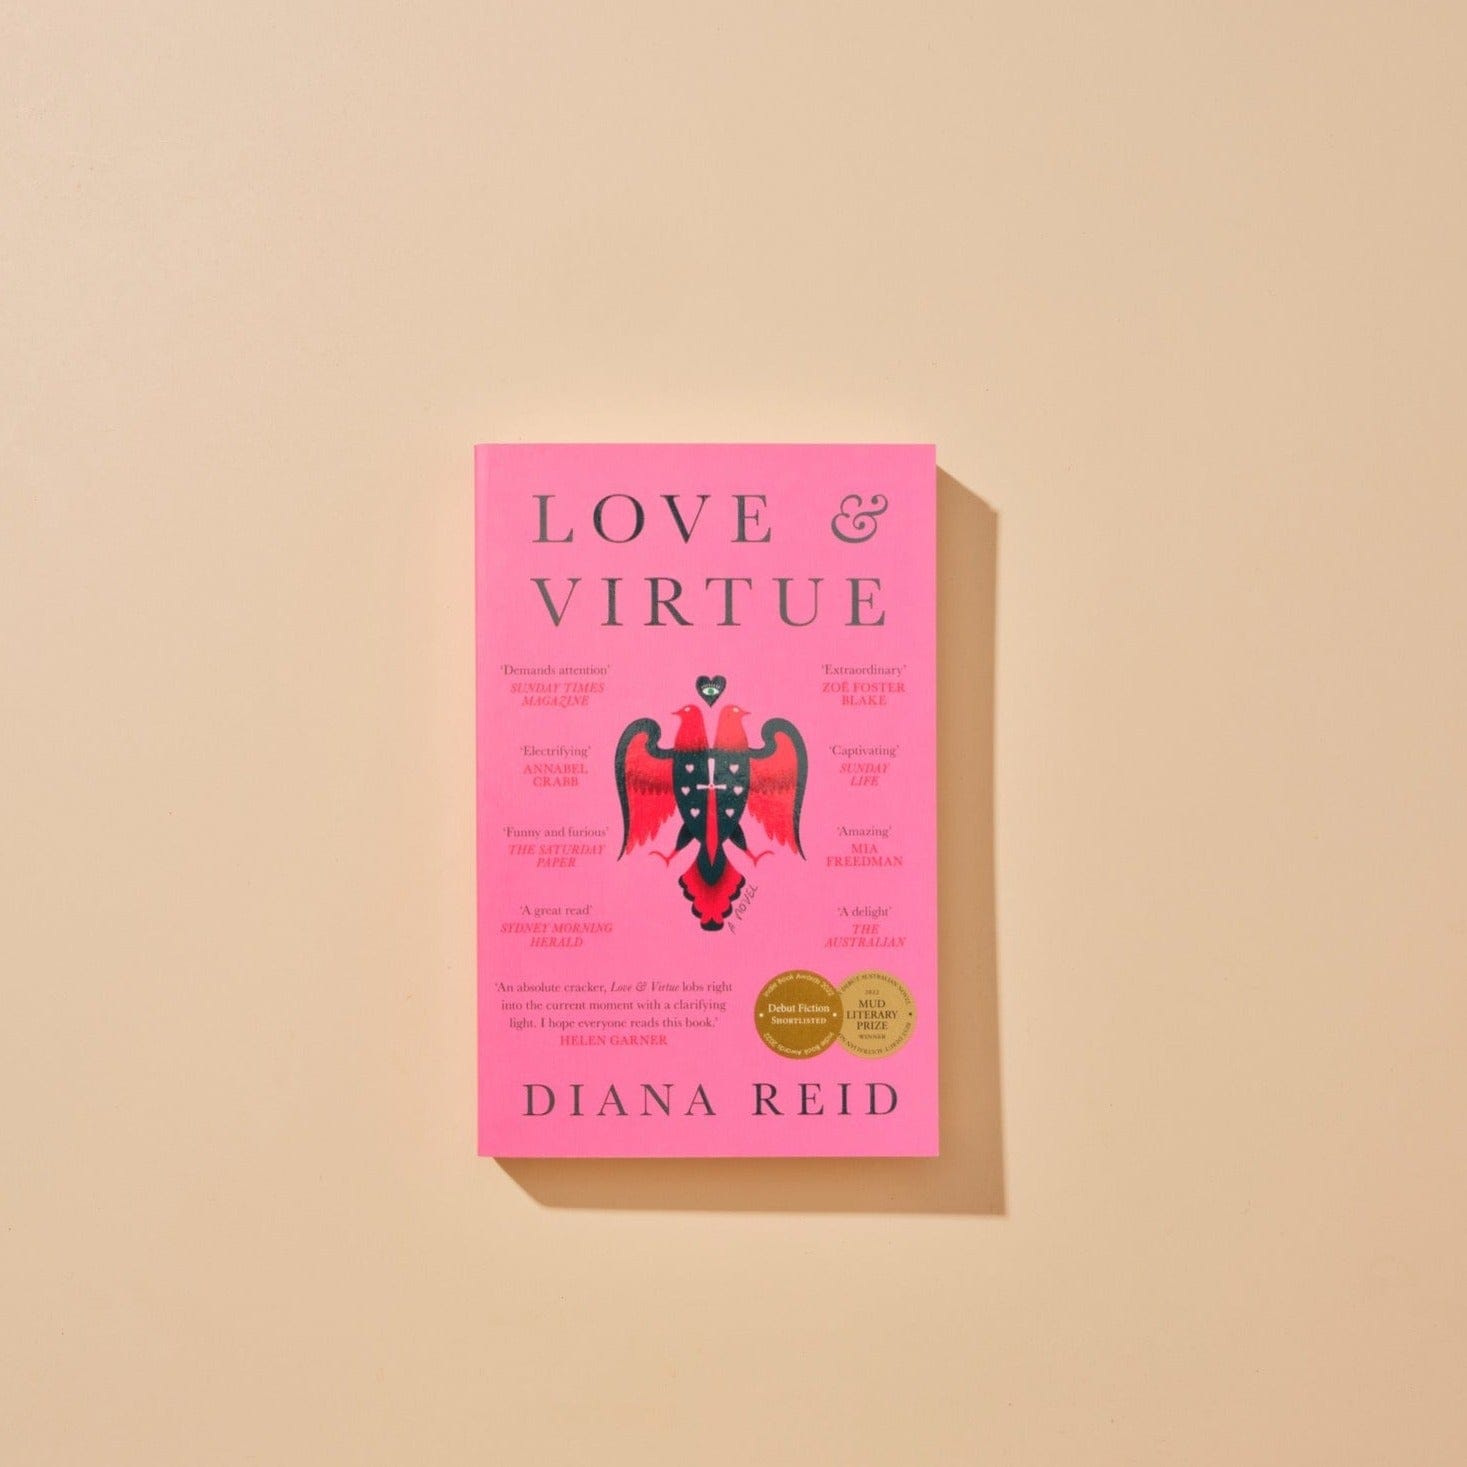 This image features the cover of 'Love and Virtue' written by Diana Reid. This book is apart of gifting bundle 'The Book Worm'